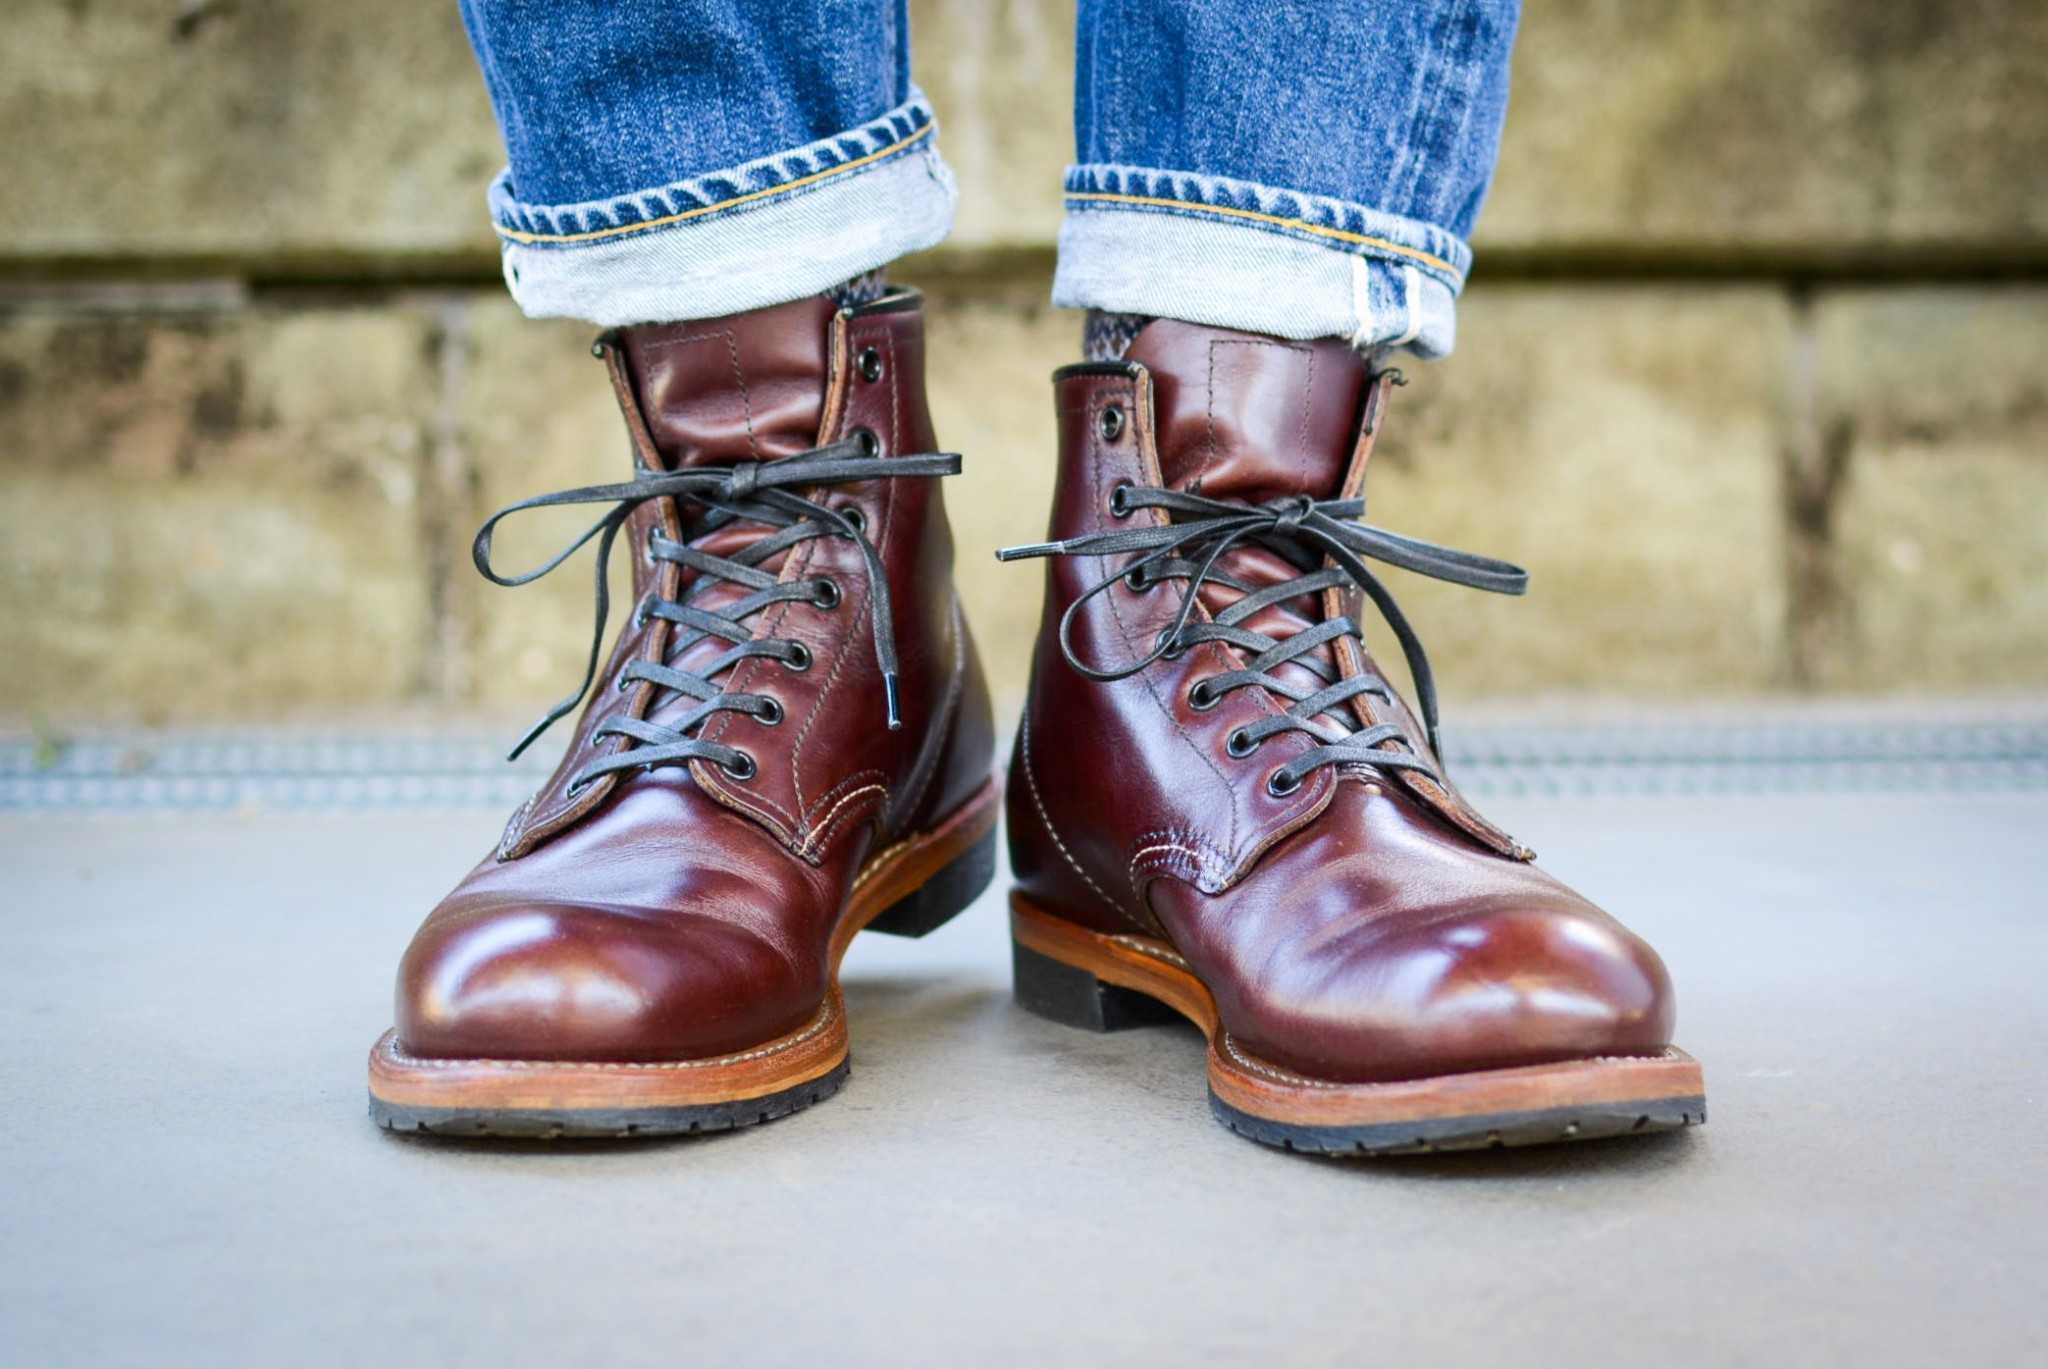 Red wing vs thorogood moc toe boots: which one is better?